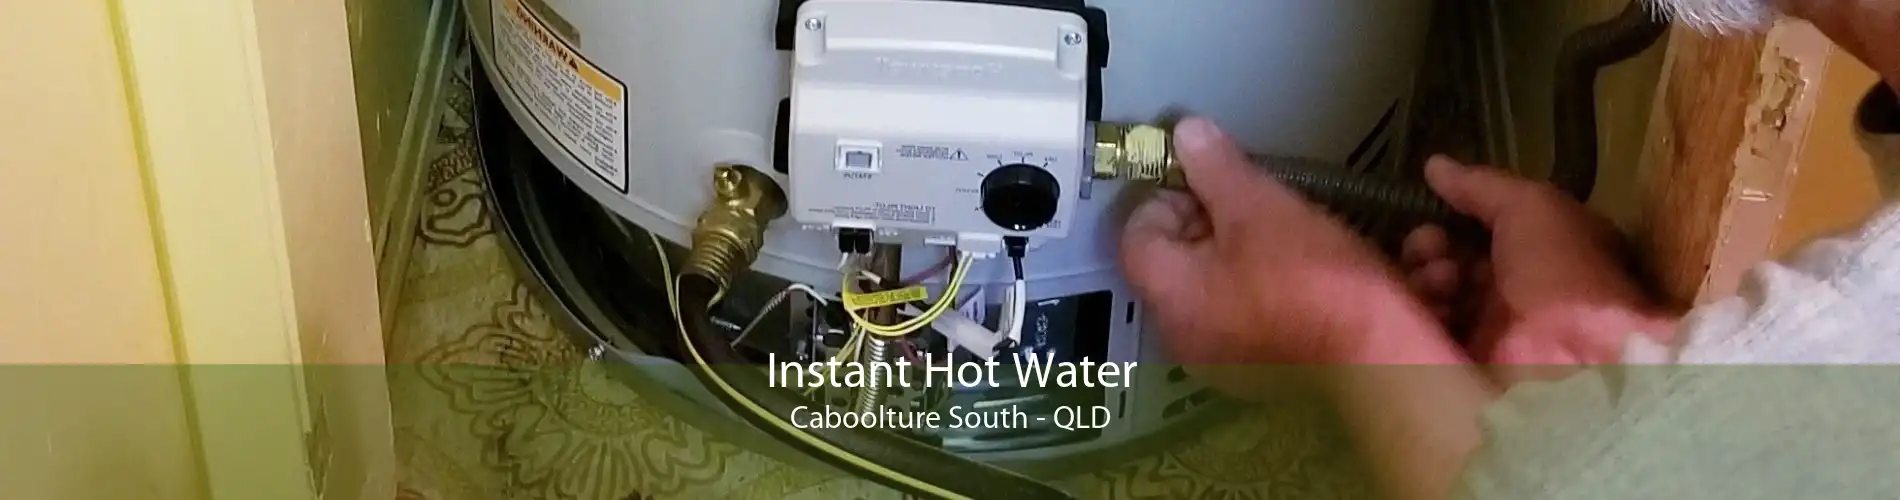 Instant Hot Water Caboolture South - QLD